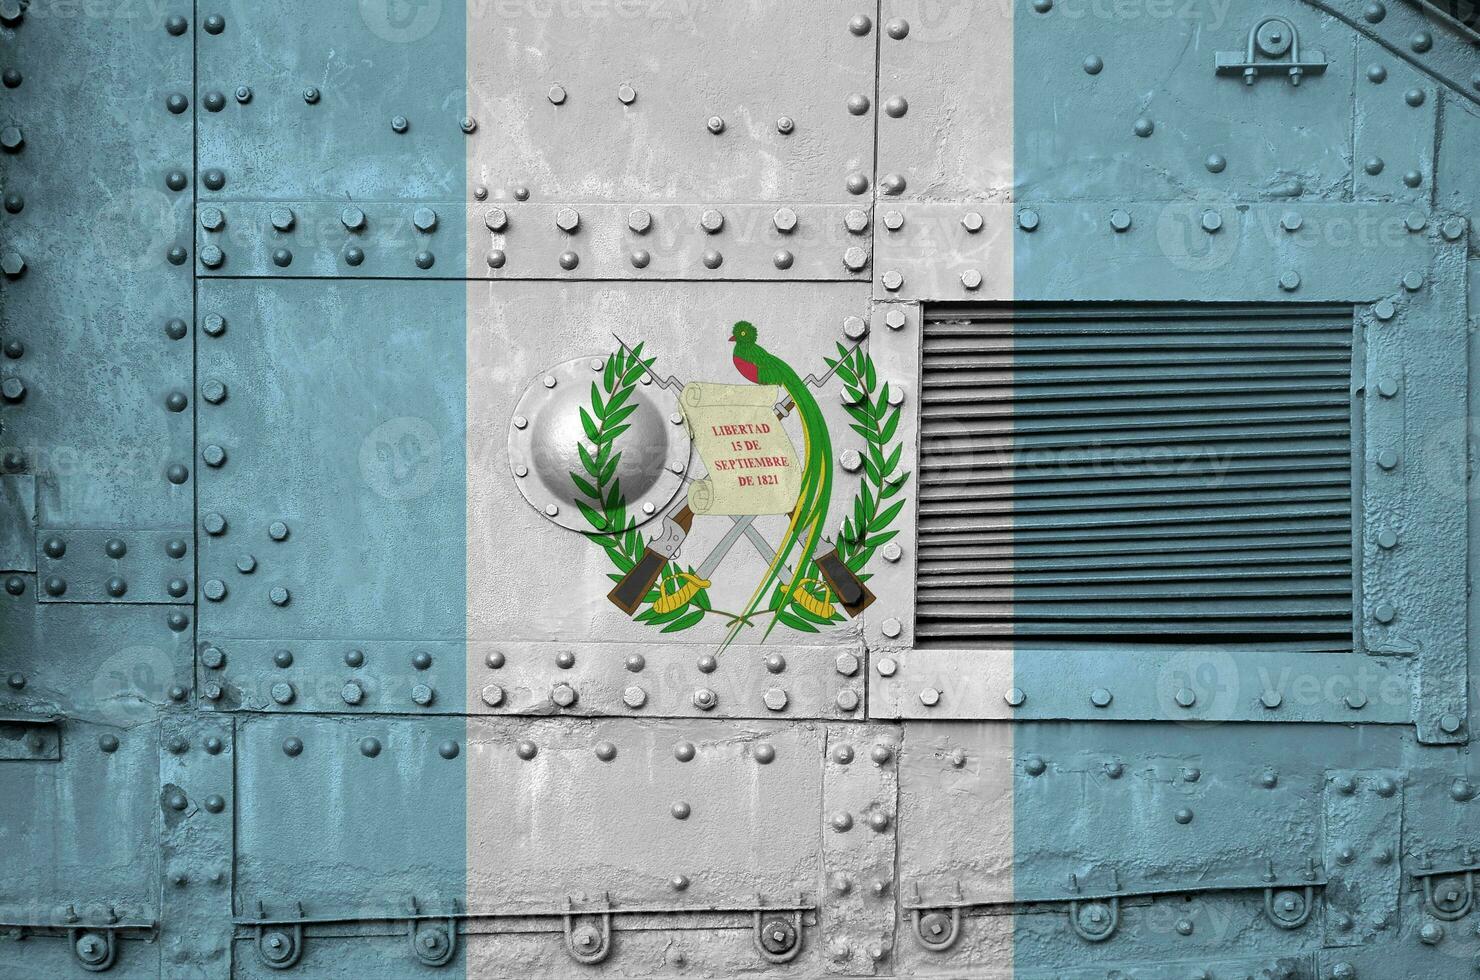 Guatemala flag depicted on side part of military armored tank closeup. Army forces conceptual background photo